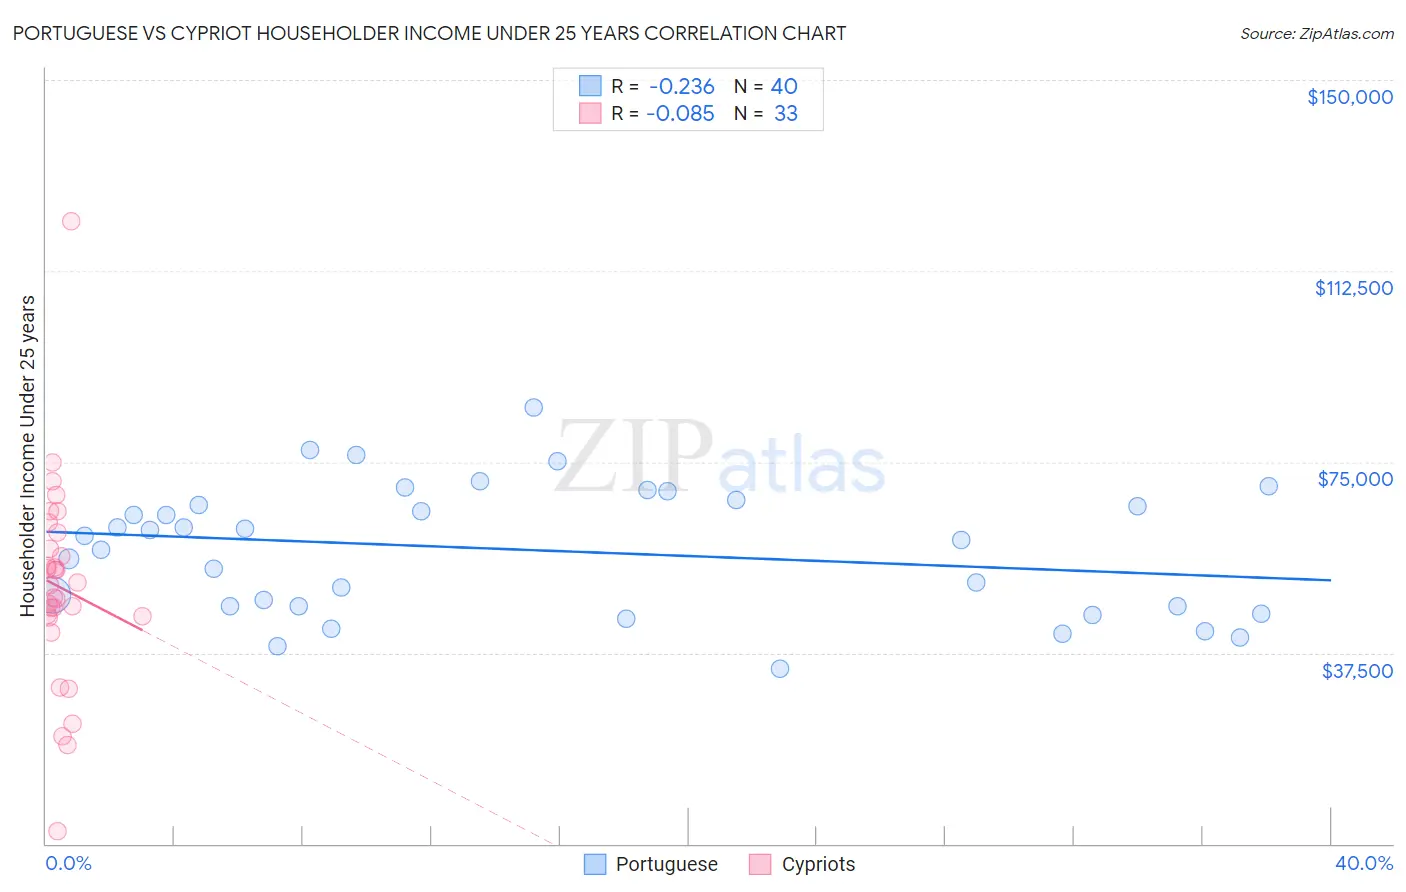 Portuguese vs Cypriot Householder Income Under 25 years